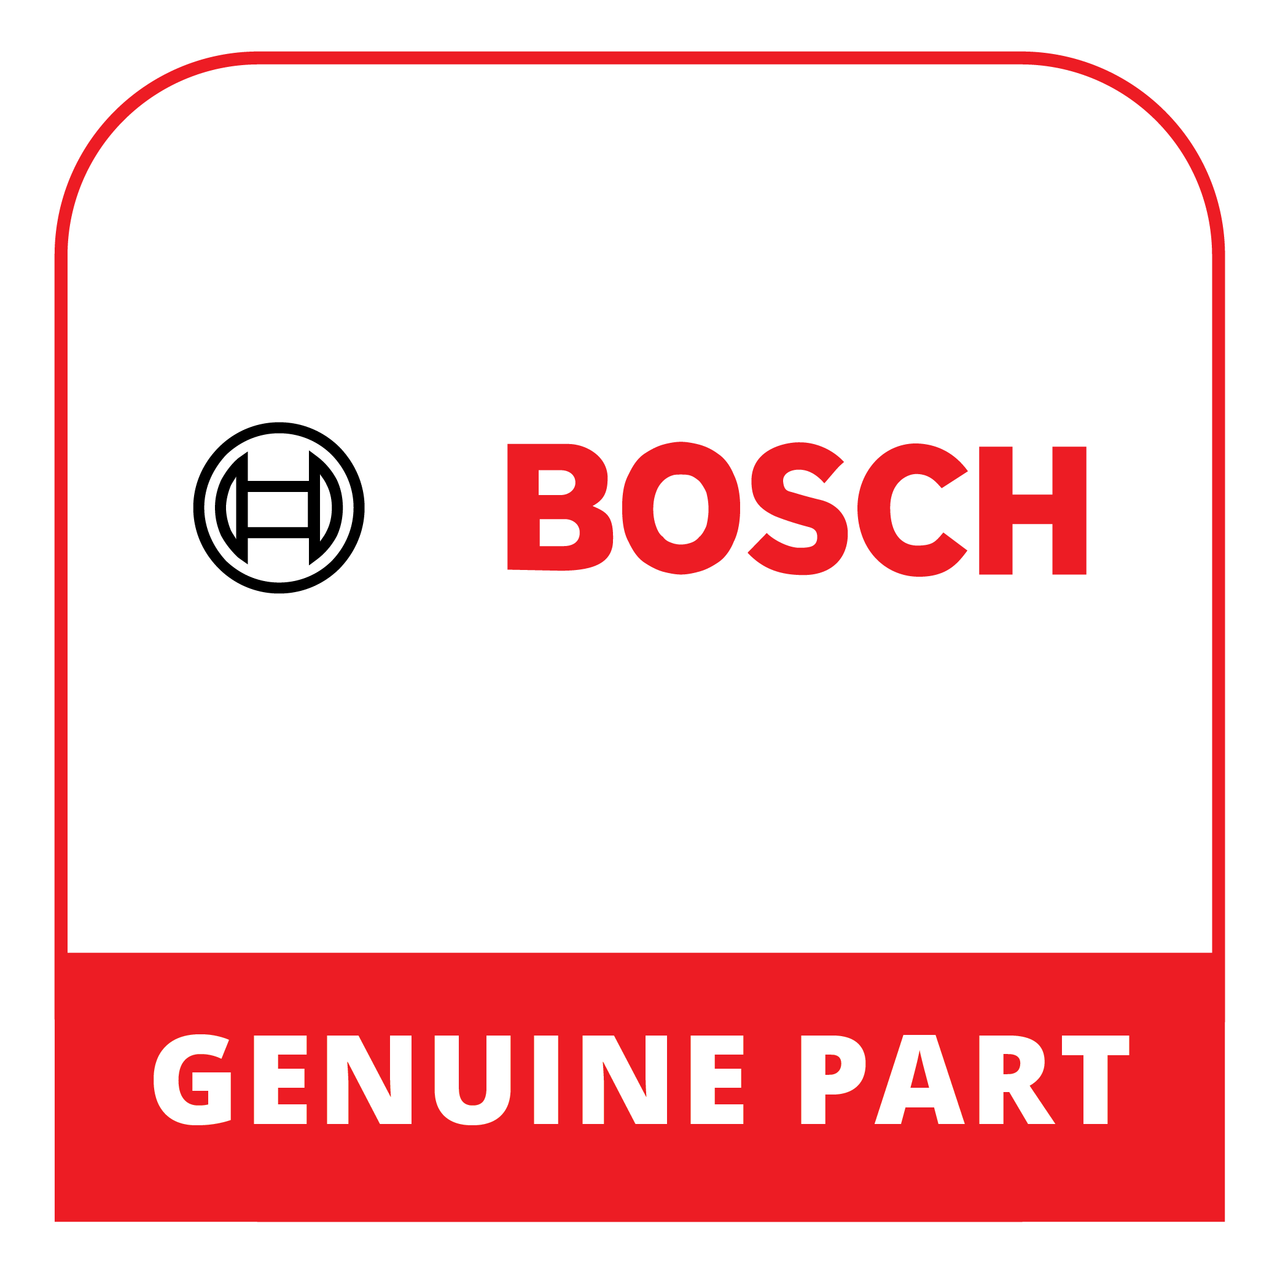 Bosch (Thermador) 18077508 - Instruction Manual - Genuine Bosch (Thermador) Part